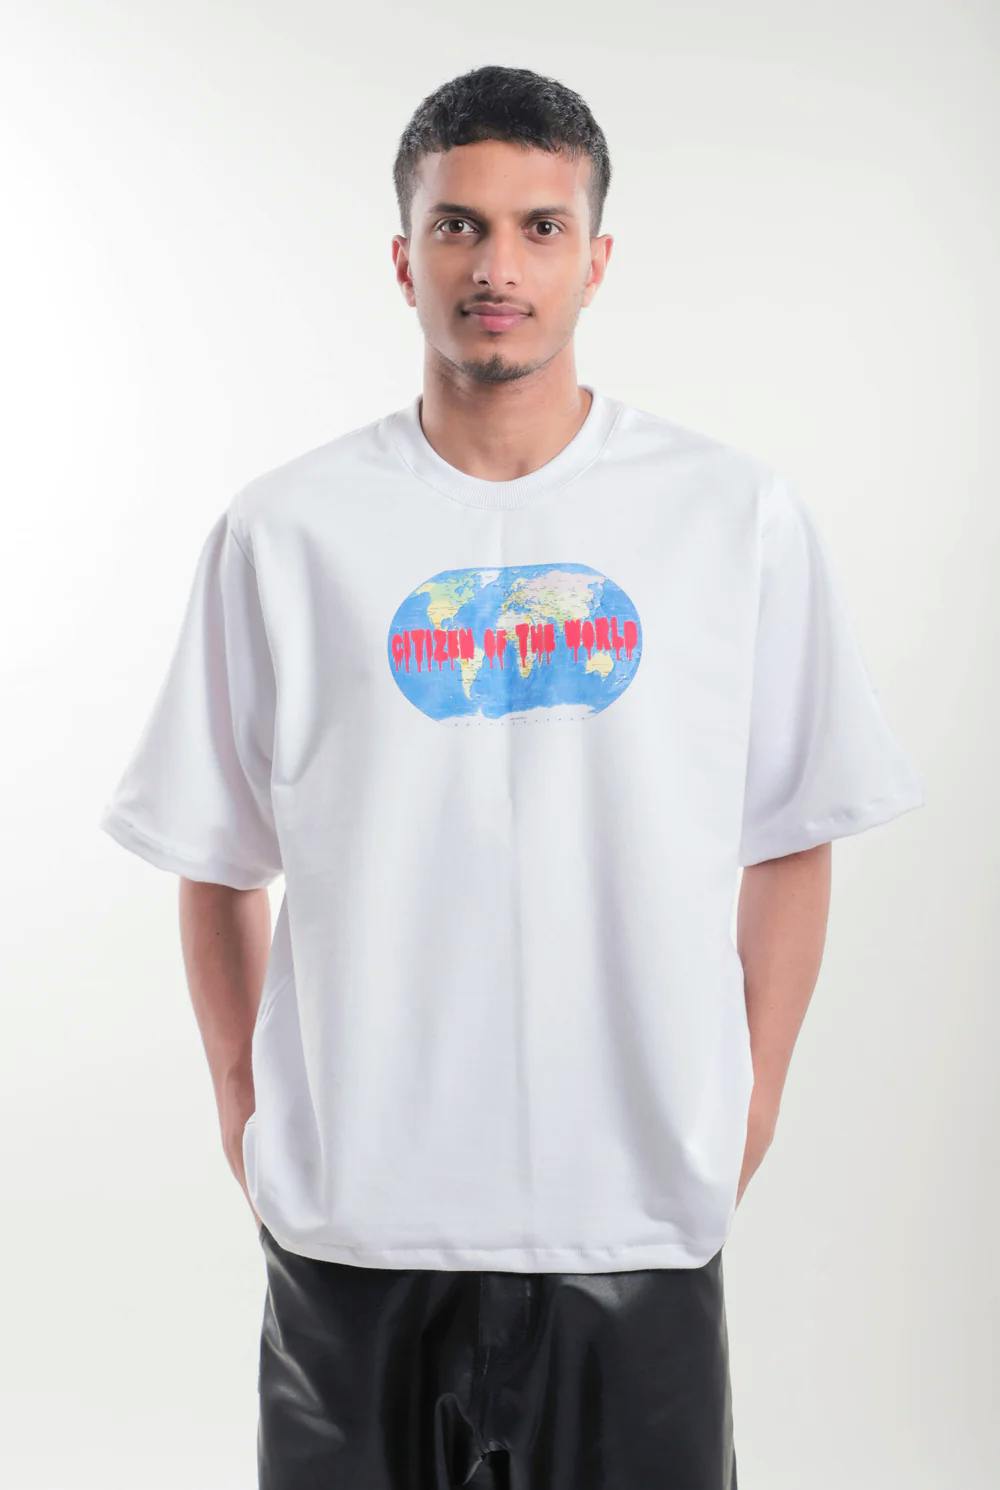 Citizen of the World T-shirt, a product by TOFFLE